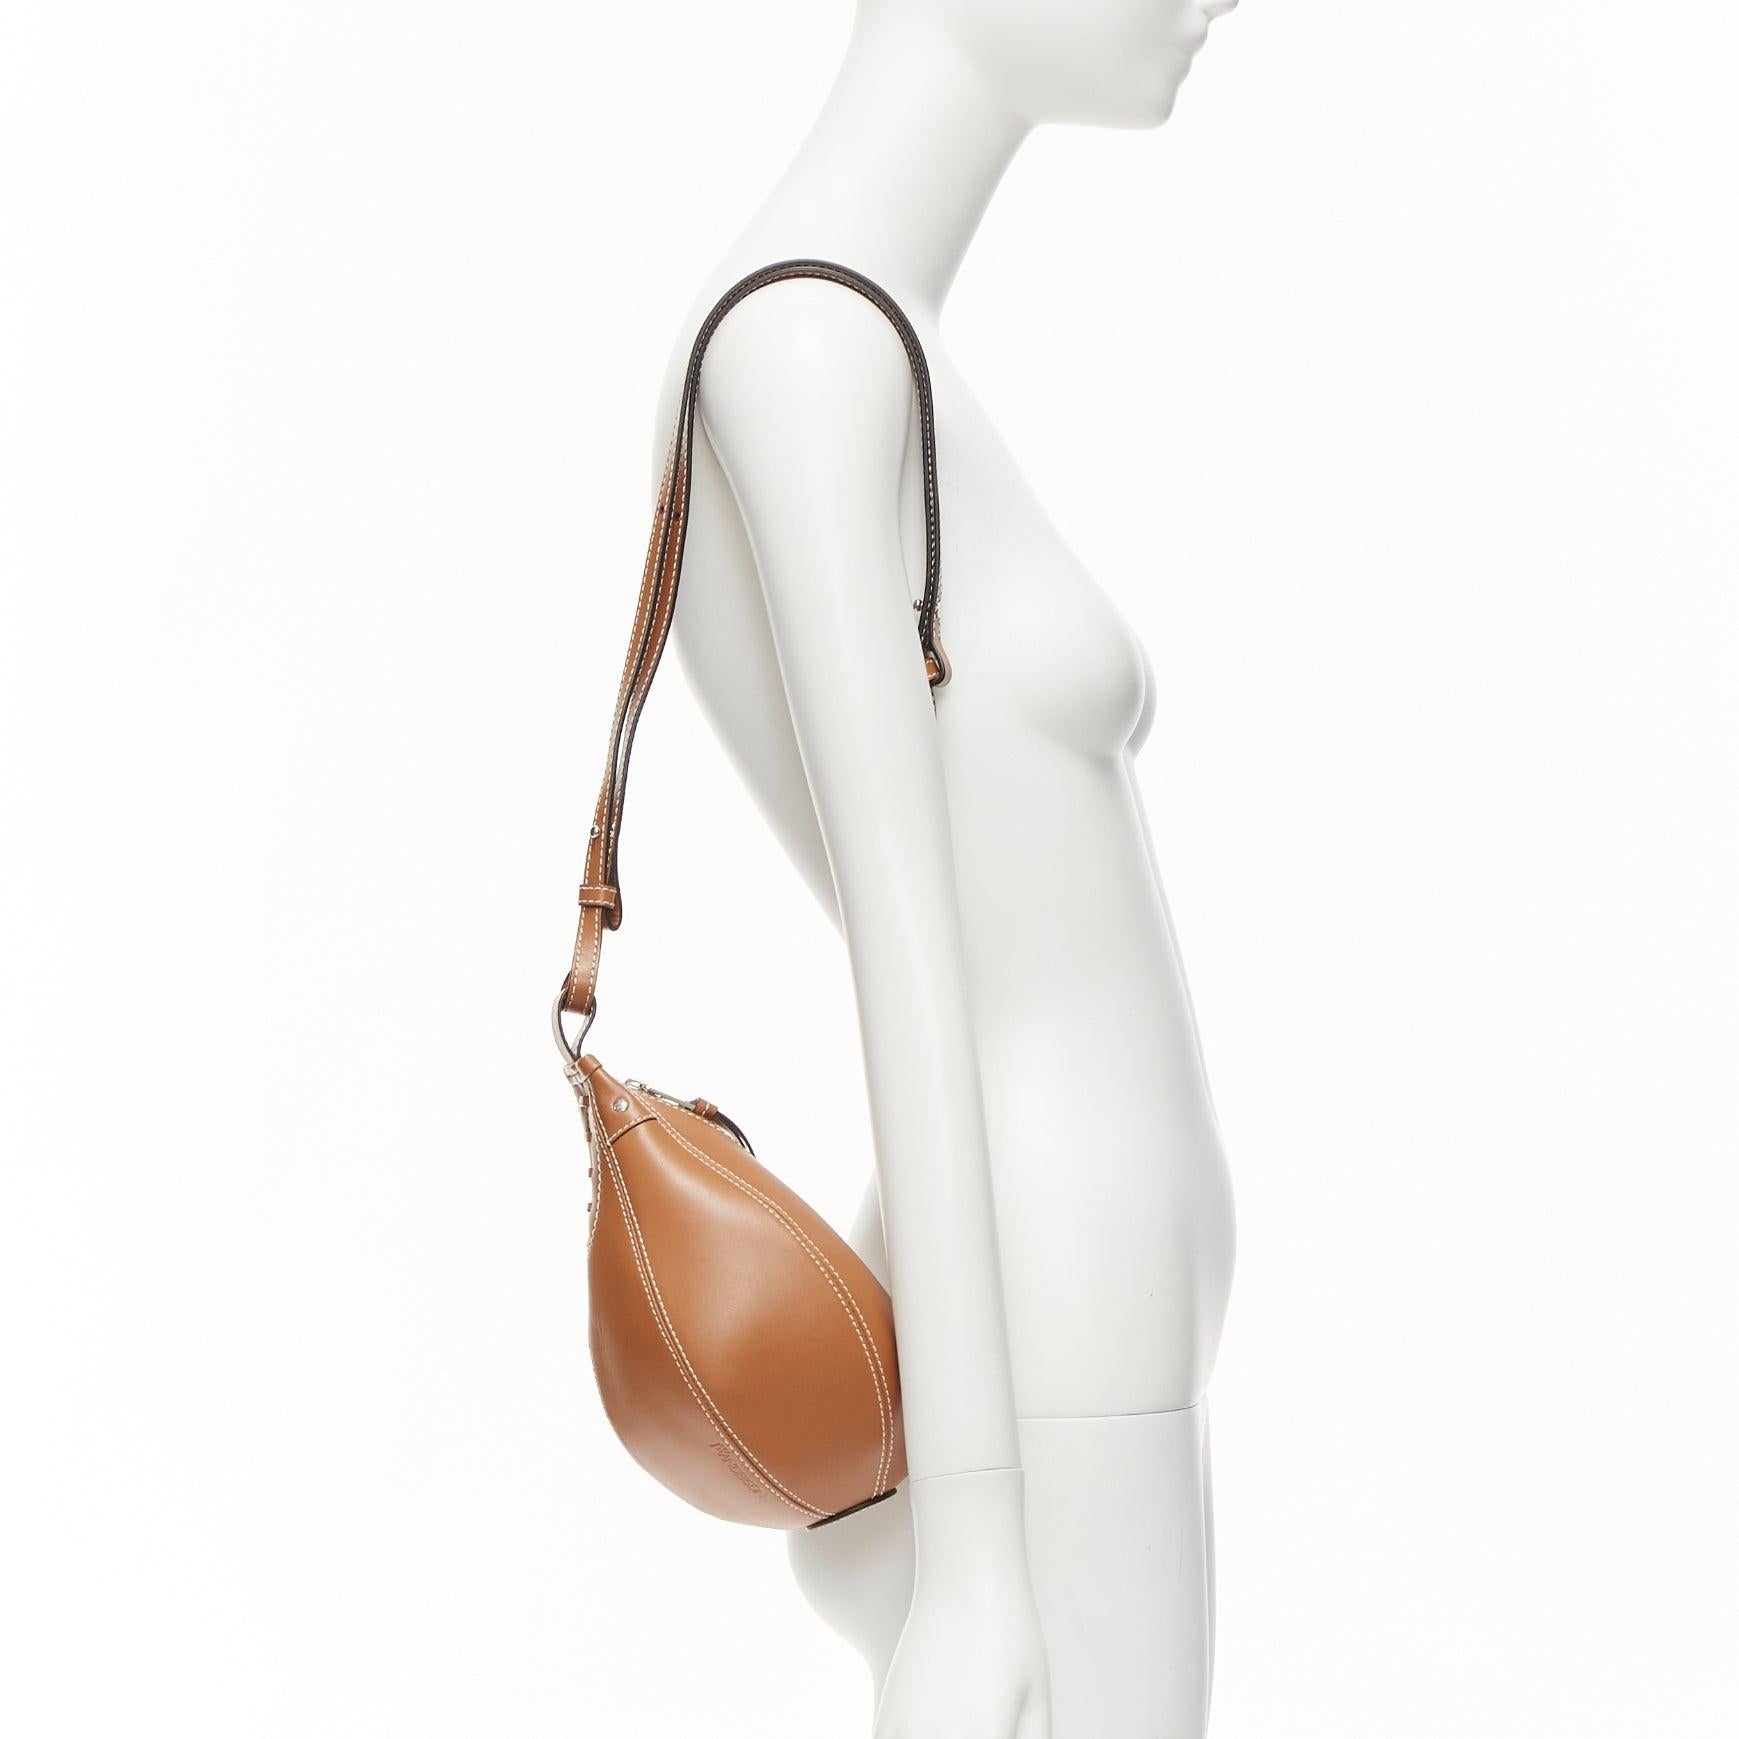 JW ANDERSON Small Punch tan leather logo silver zip teardrop shoulder bag
Reference: NILI/A00055
Brand: JW Anderson
Designer: JW Anderson
Model: Punch
Material: Leather
Color: Brown
Pattern: Solid
Closure: Zip
Lining: Brown Leather
Extra Details: